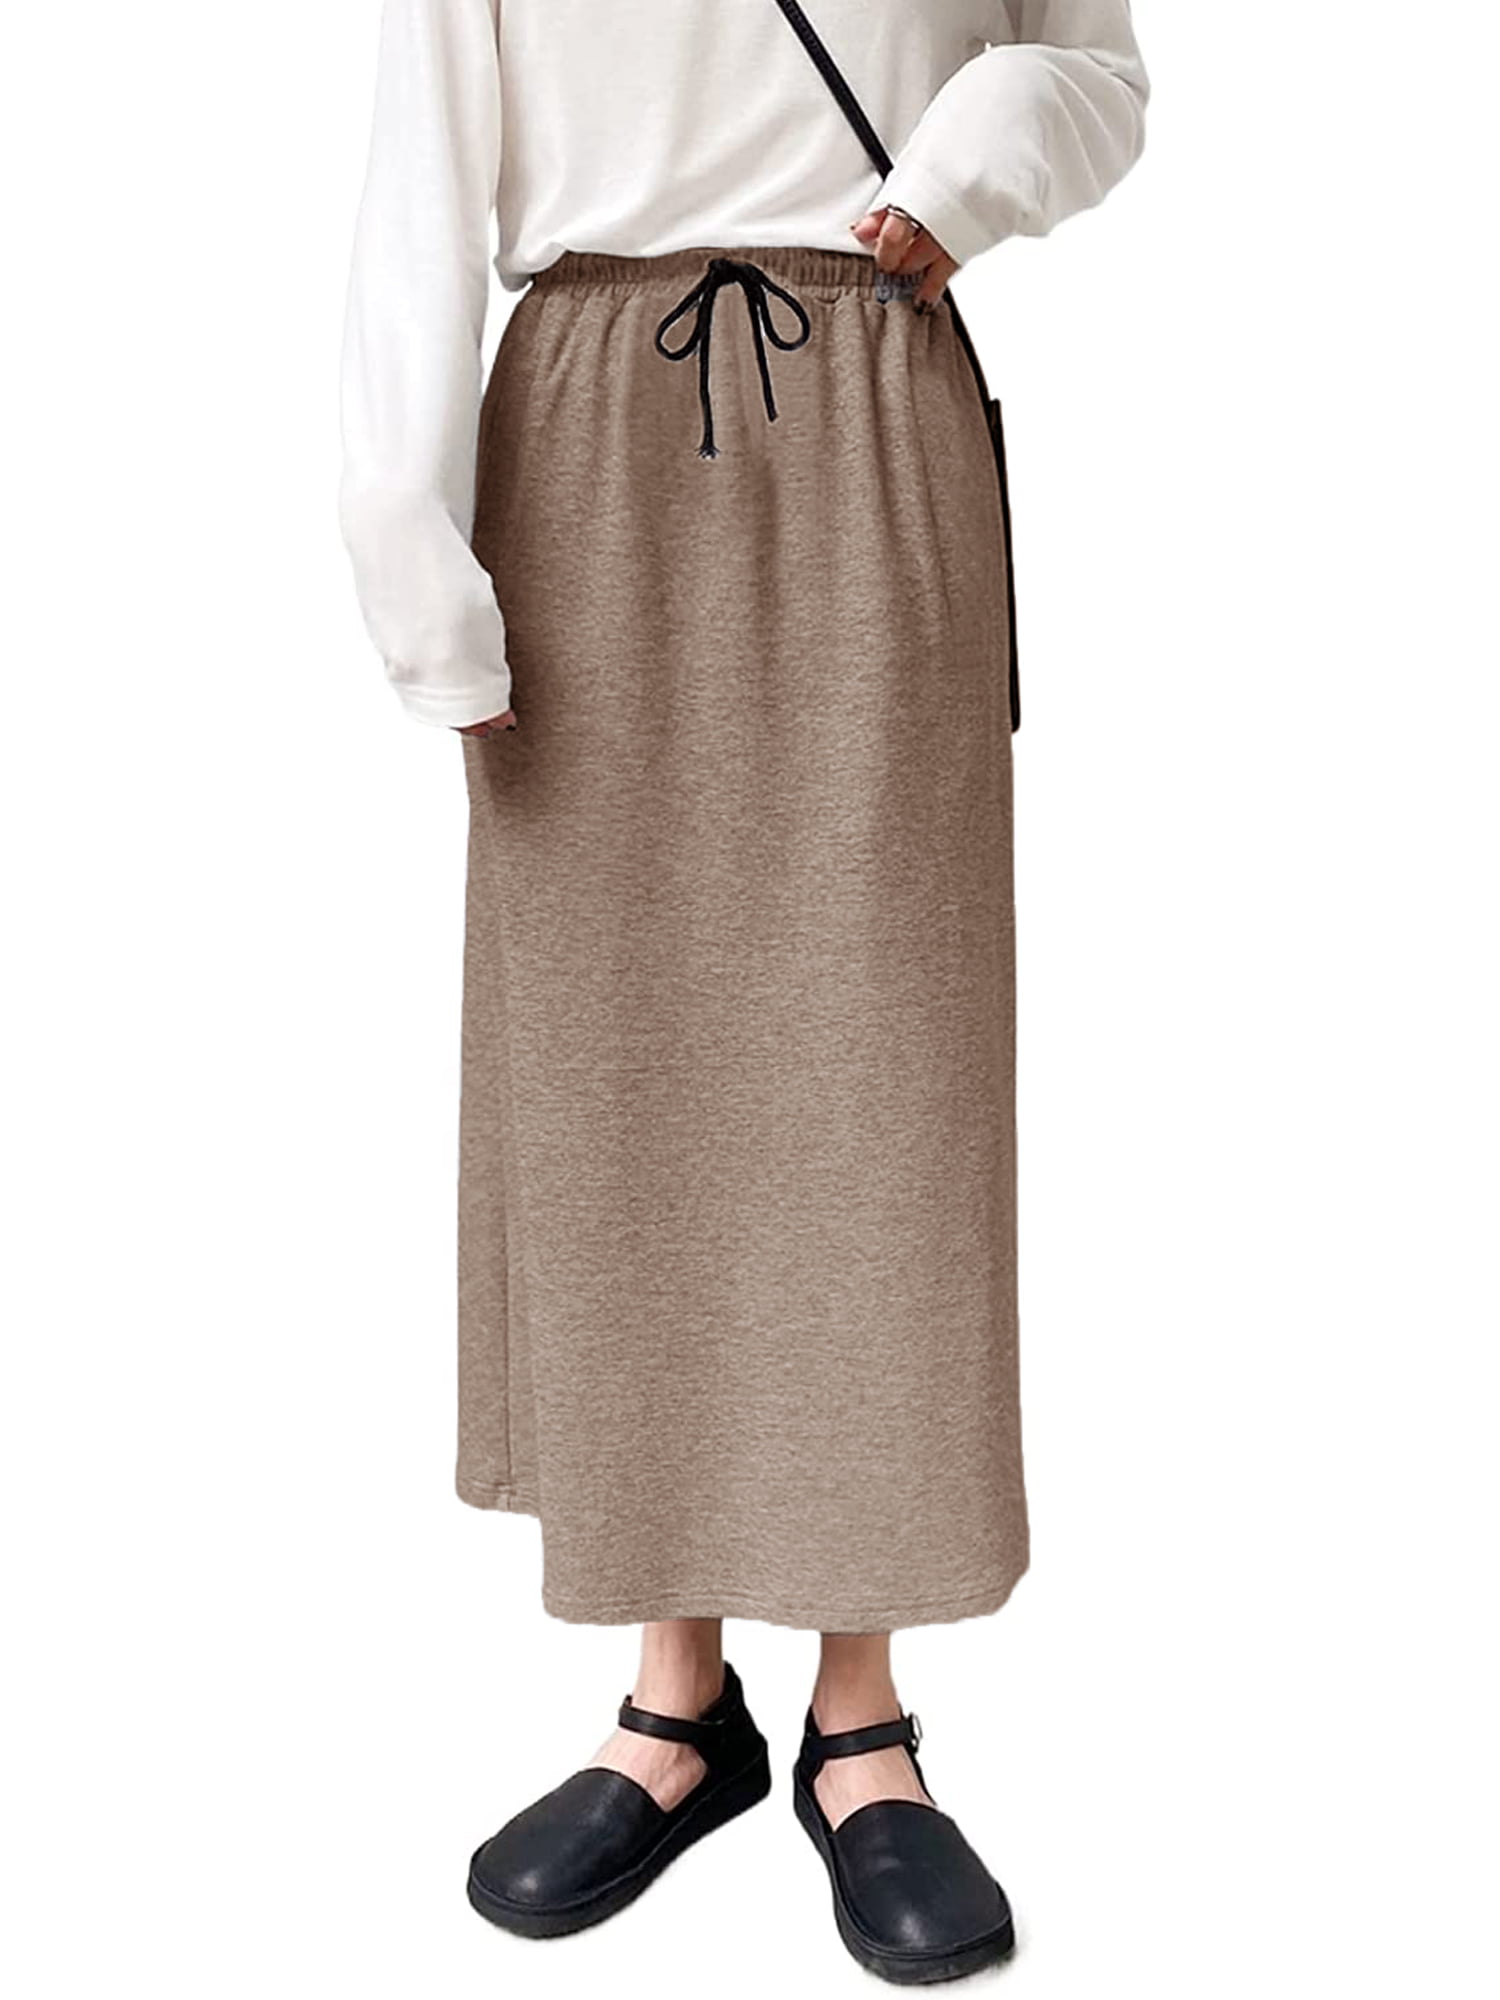 ThCrease Womens Fall Winter Elastic Waisted Maxi Skirts Fleece Lined A Line Long Skirt with Pockets 